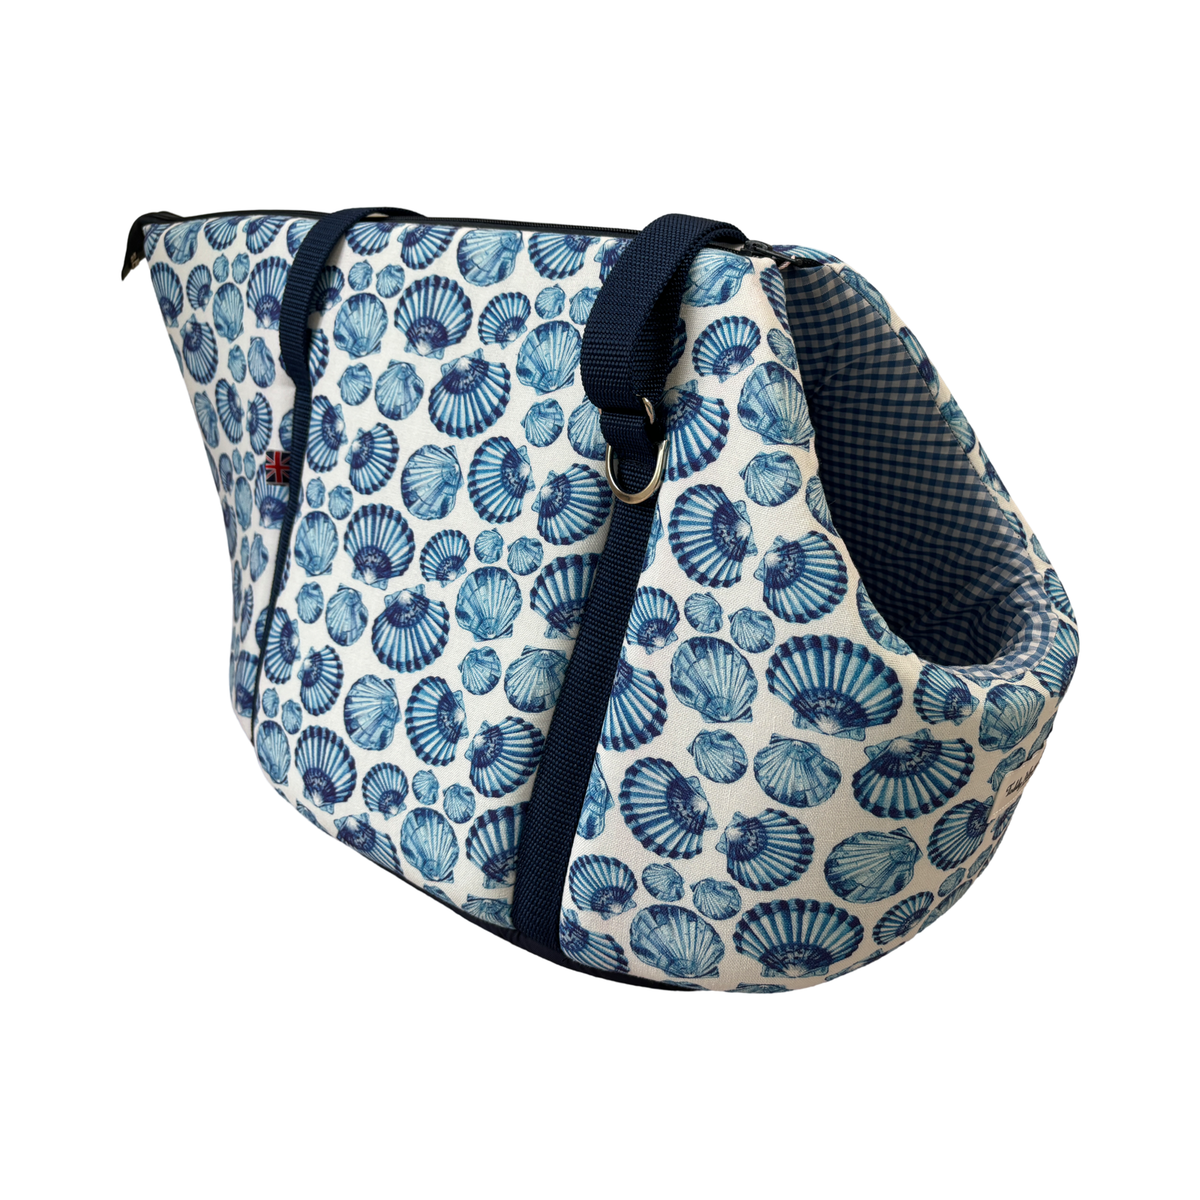 &#39;The Cornwall&#39; Seashells Dog Carrier - Limited Edition!